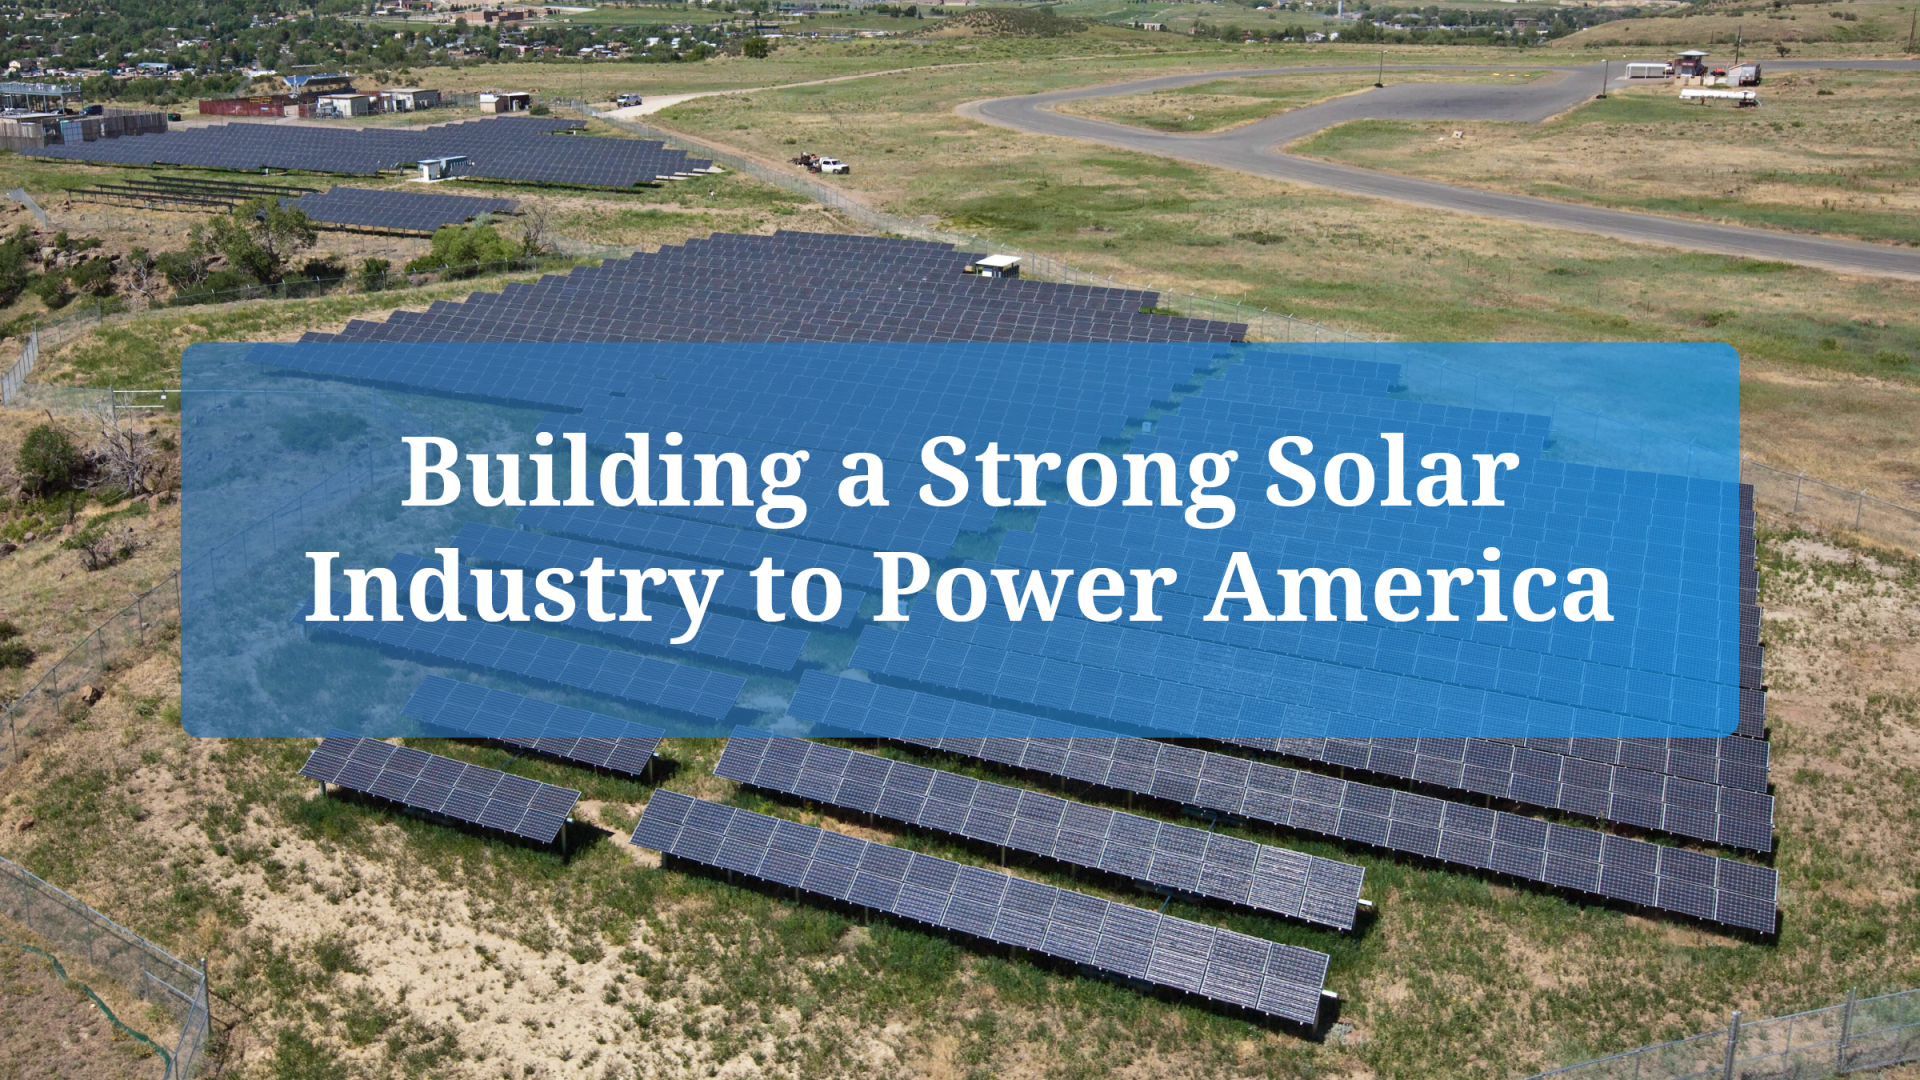 Which state has the highest solar capacity in 2021?